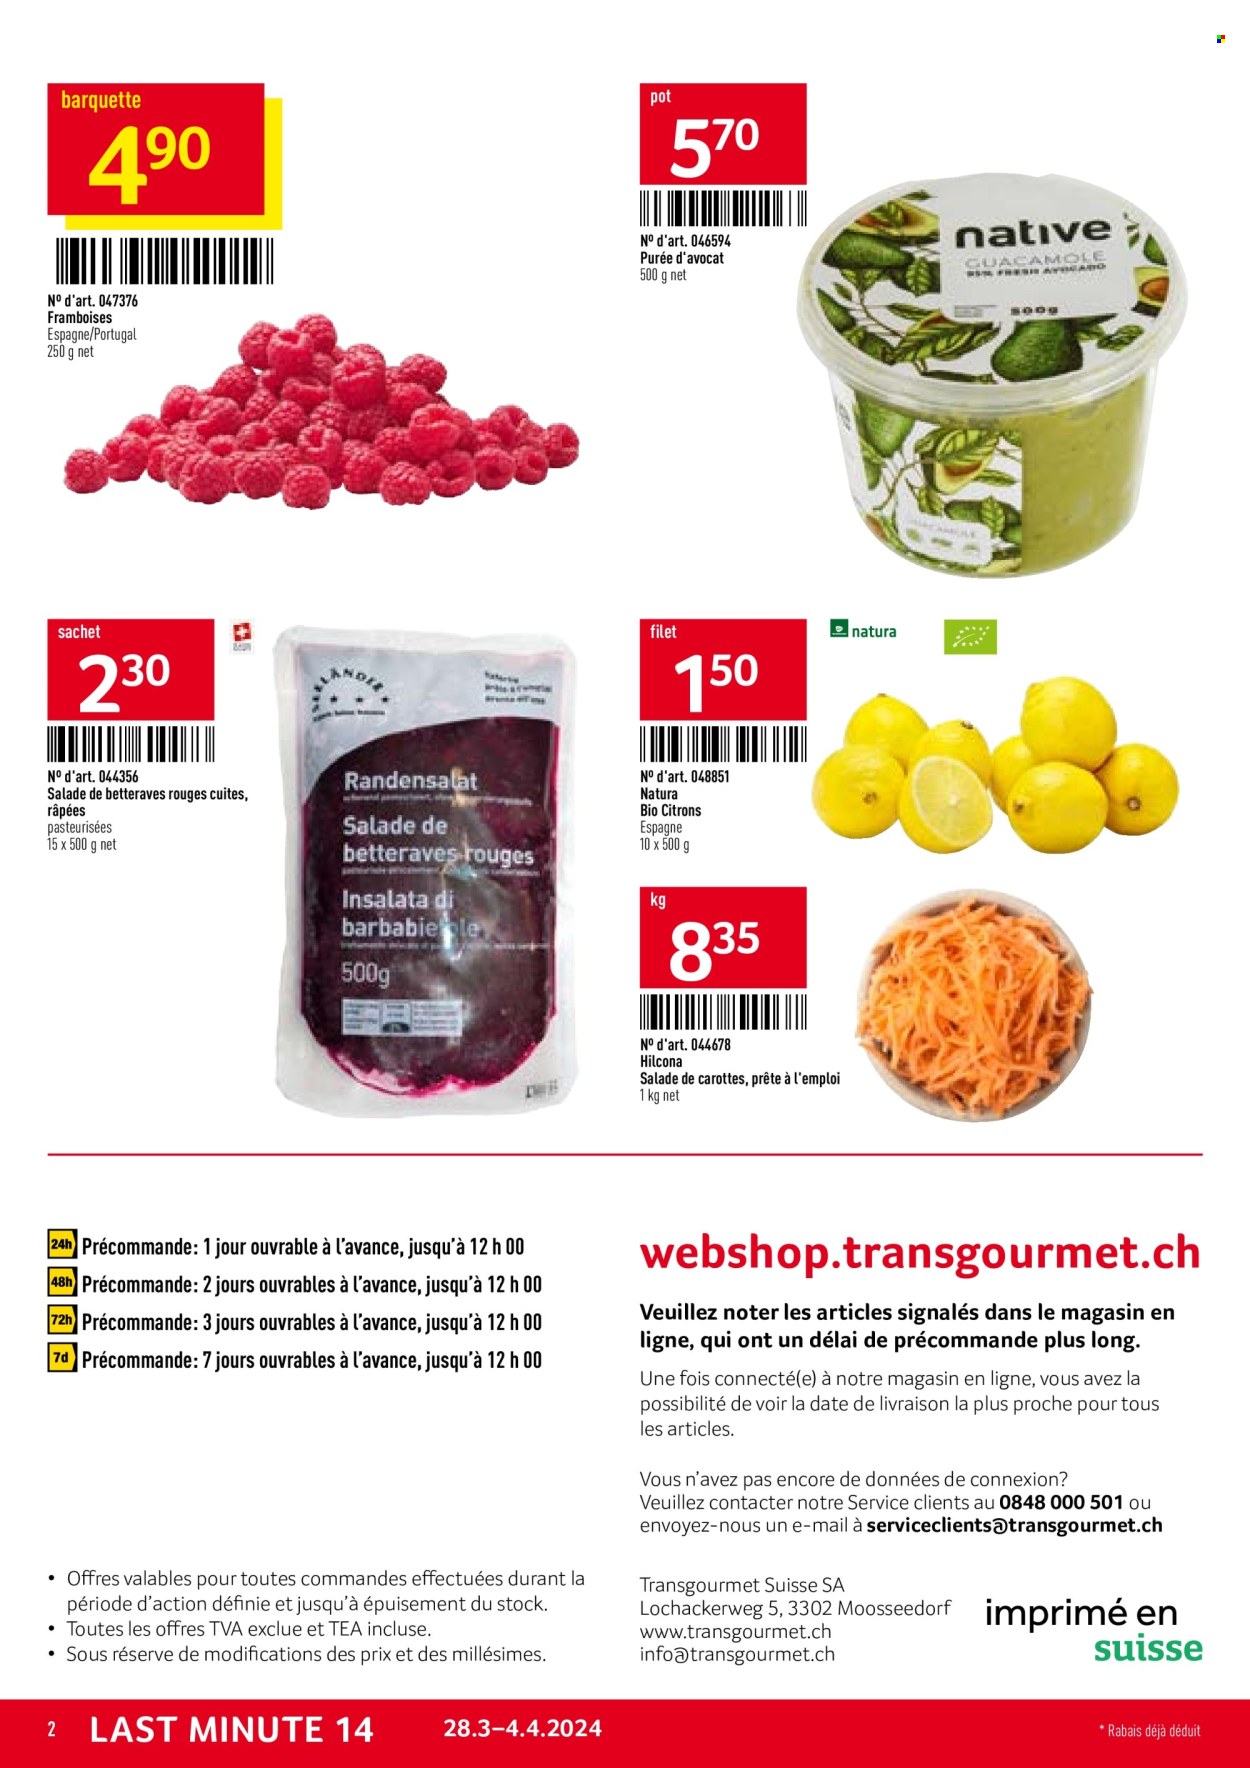 Catalogue TransGourmet - 28.3.2024 - 4.4.2024. Page 2.